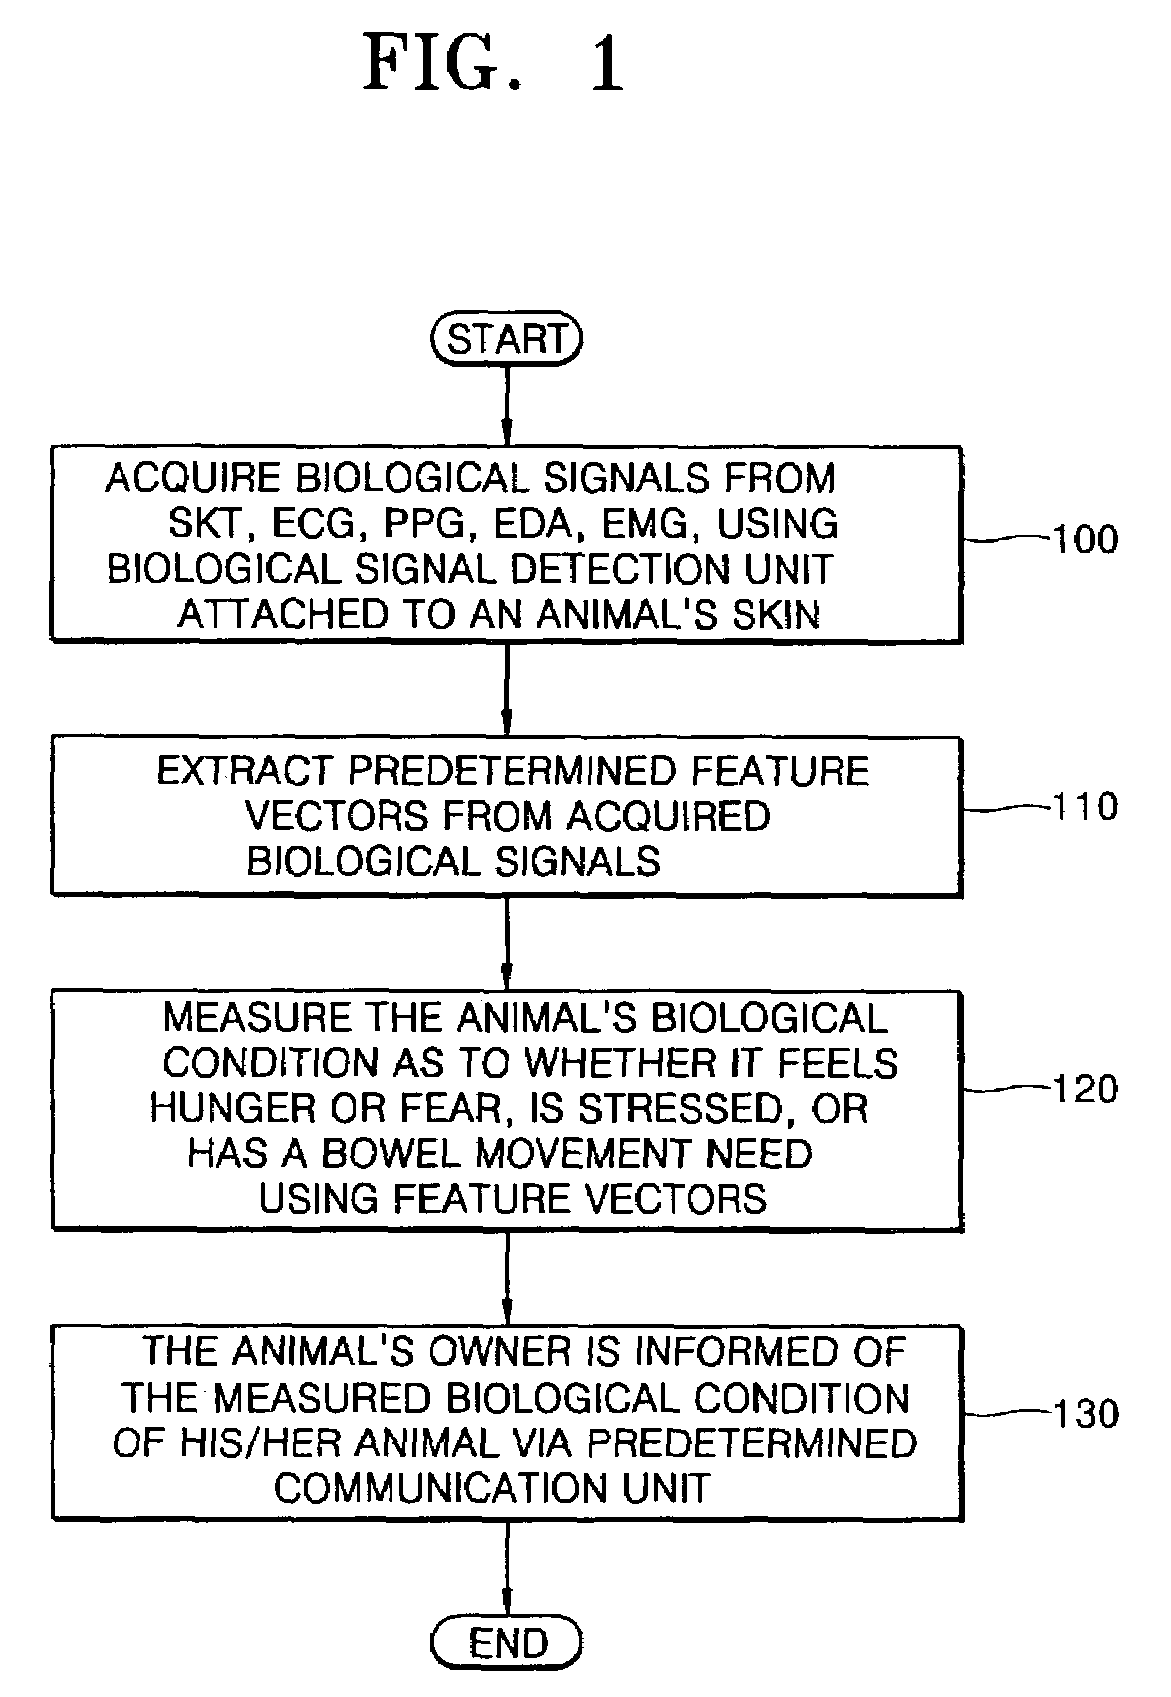 Method and apparatus for measuring animal's condition by acquiring and analyzing its biological signals